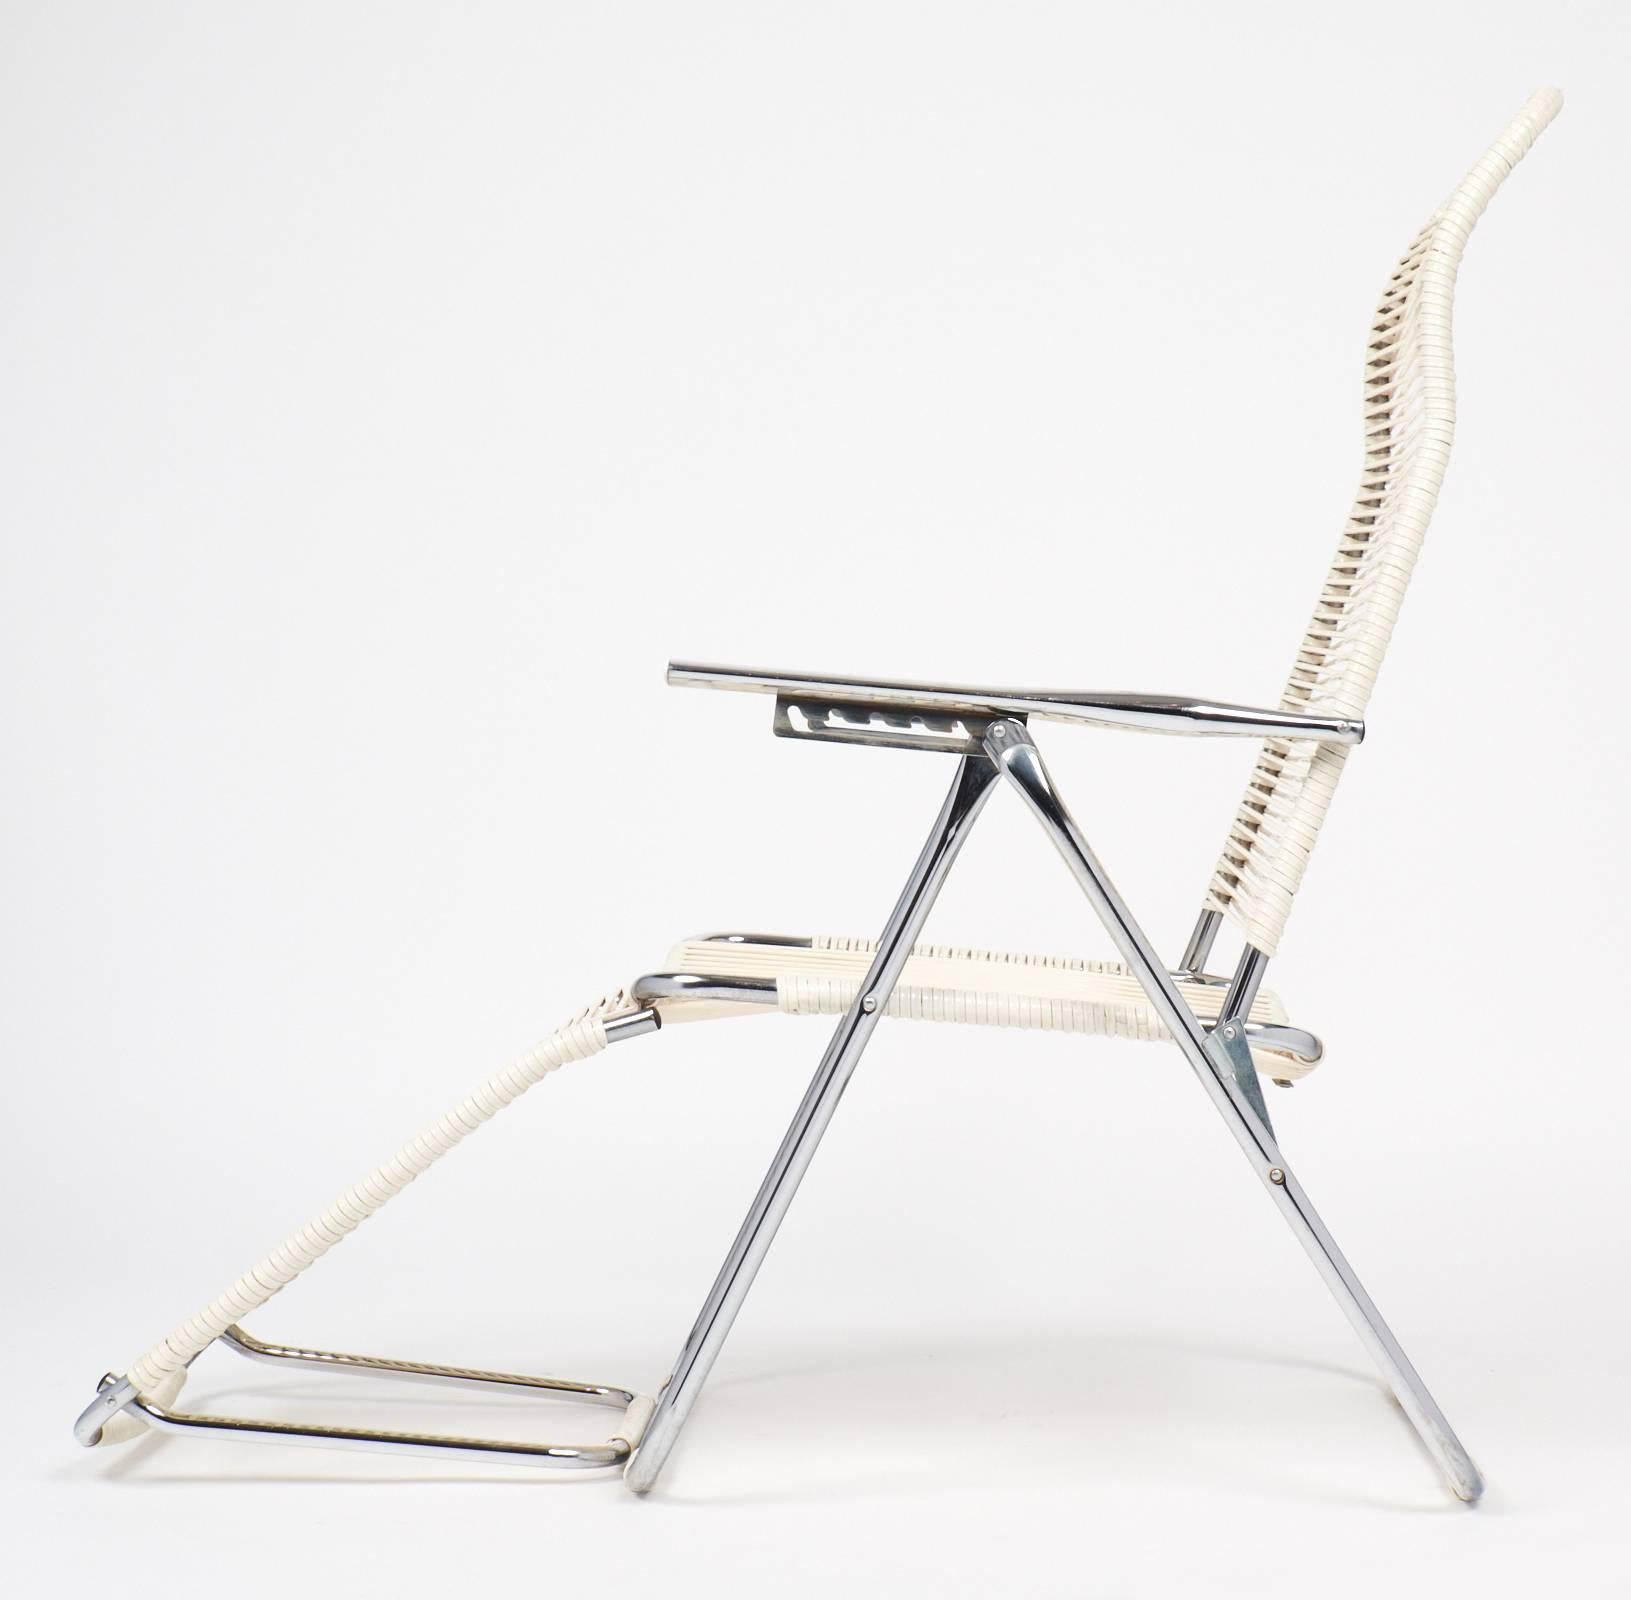 Iconic French vintage adjustable chaises longue chair with chromed steel frame. Measurements are for the chair sitting at the maximum position for the given dimension. Very comfortable and versatile.